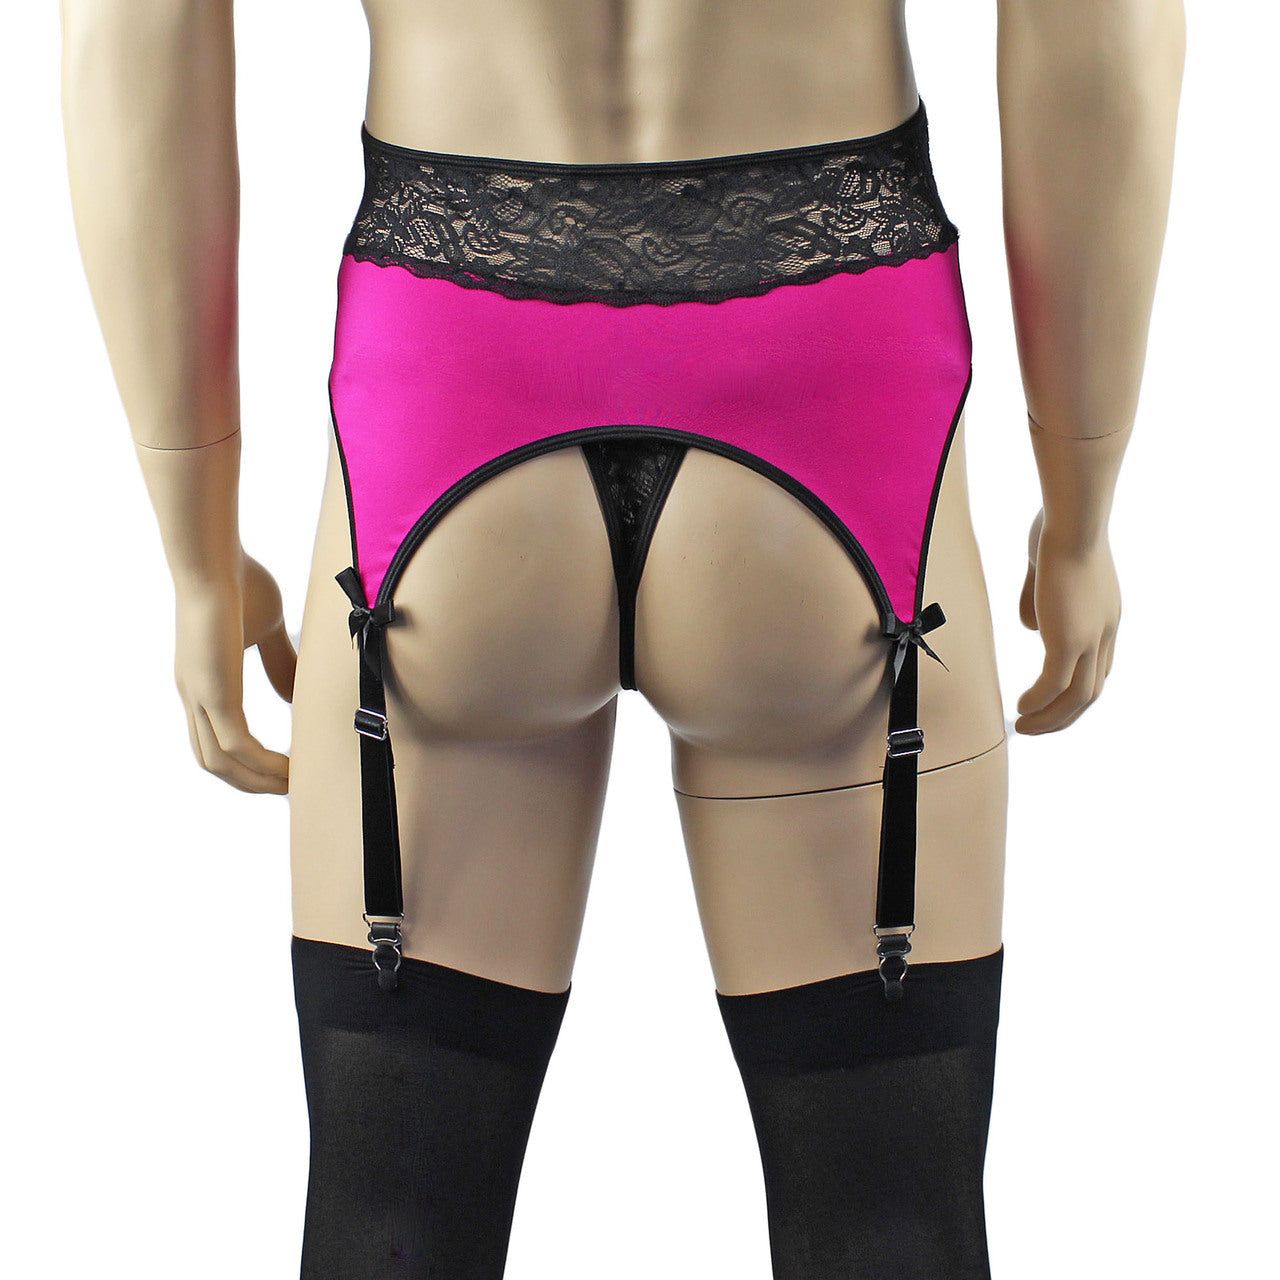 Mens Glamour Lycra & lace High Cut Garterbelt, G string & Stockings (raspberry plus other colours)